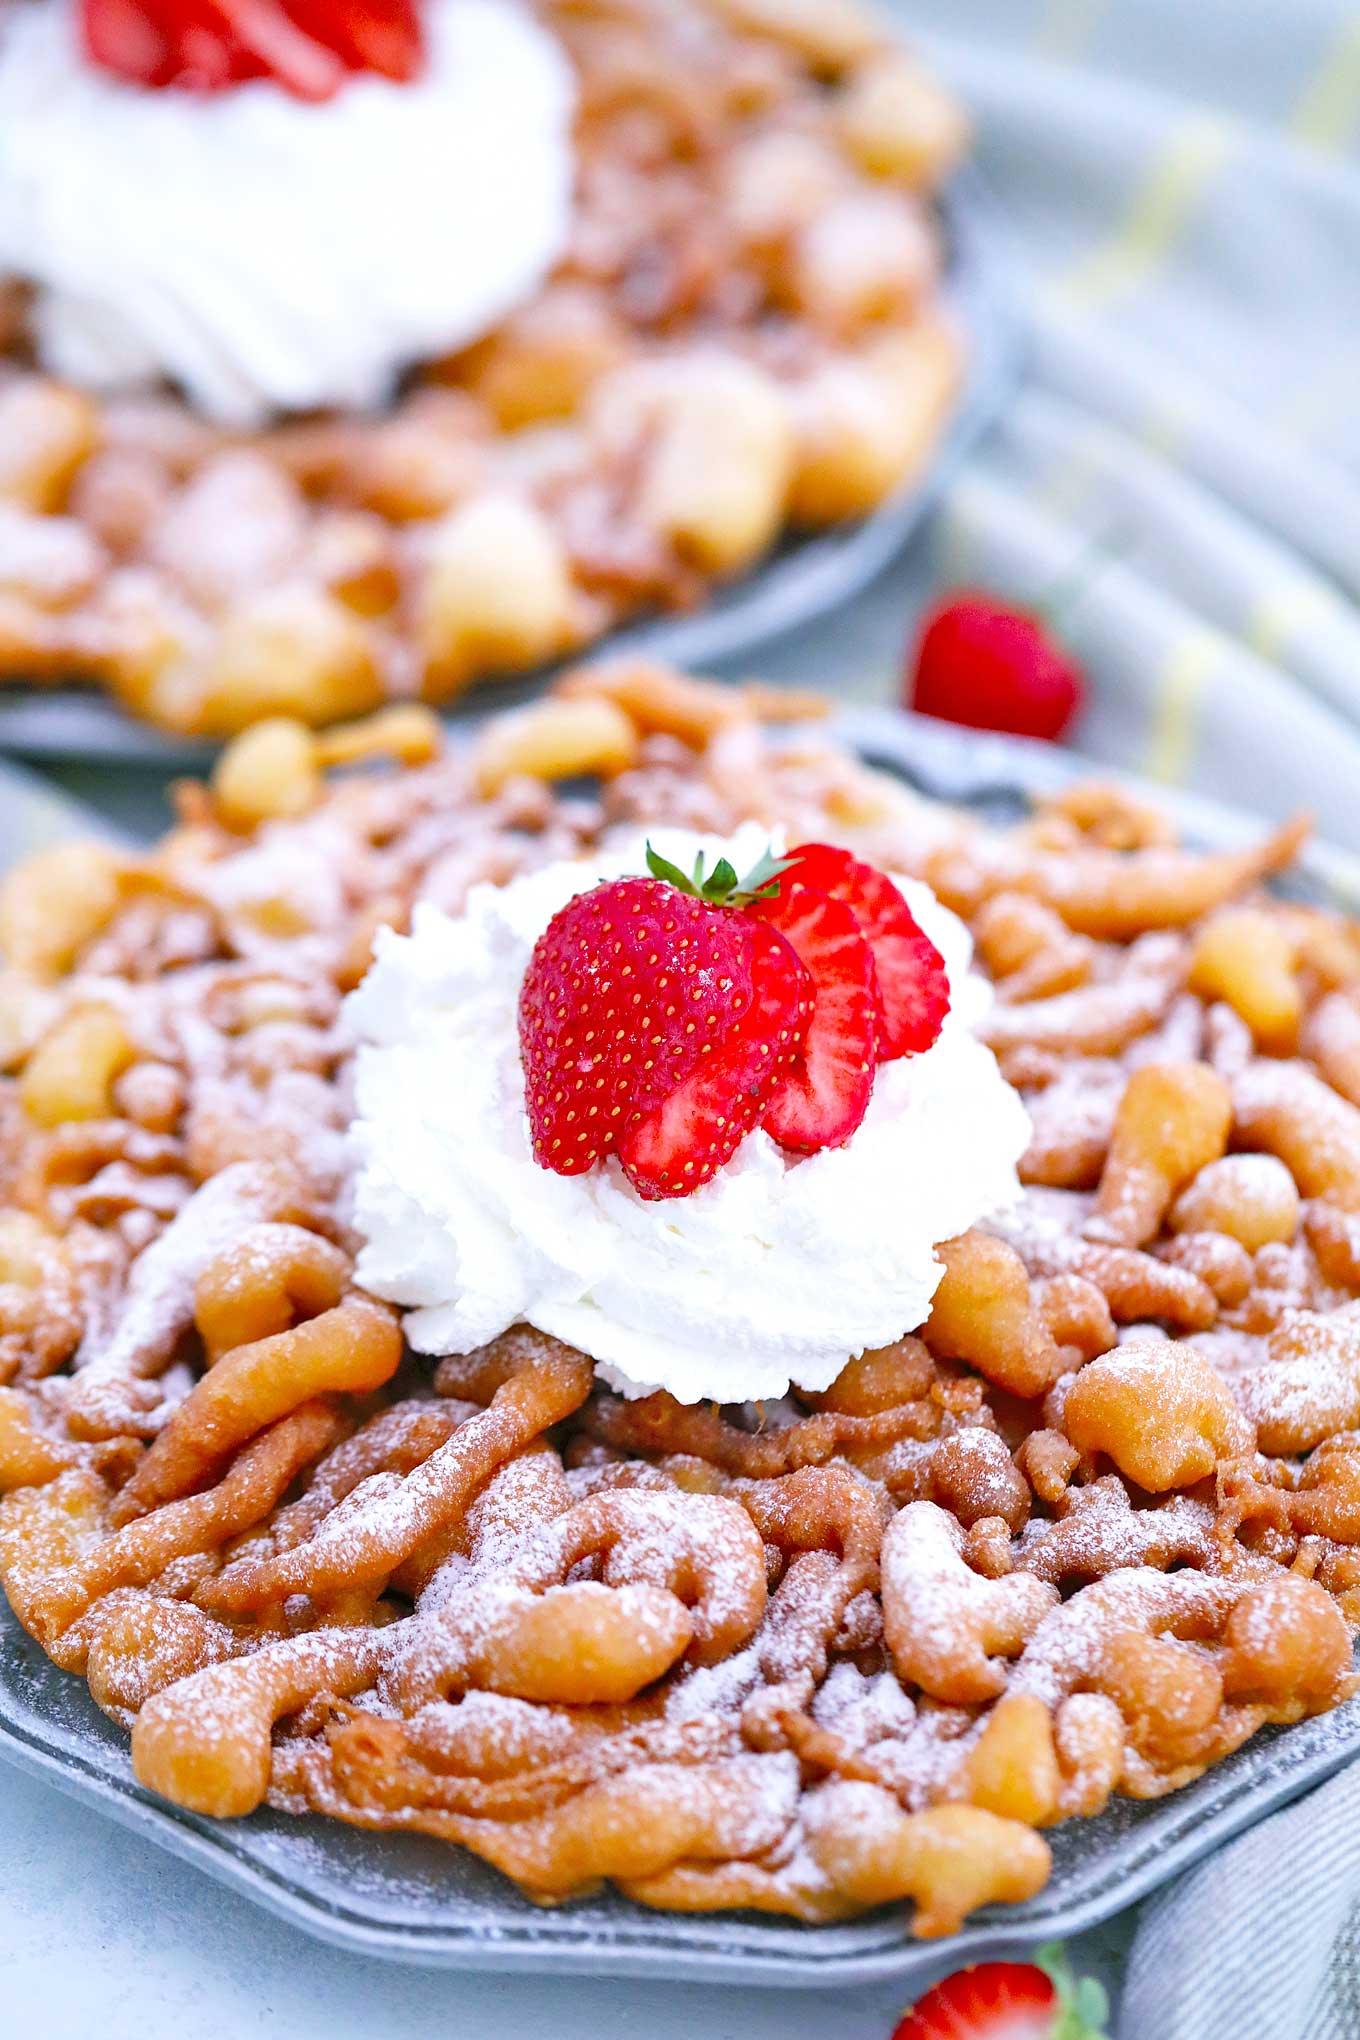 Homemade Funnel Cake Recipe - Sweet and Savory Meals